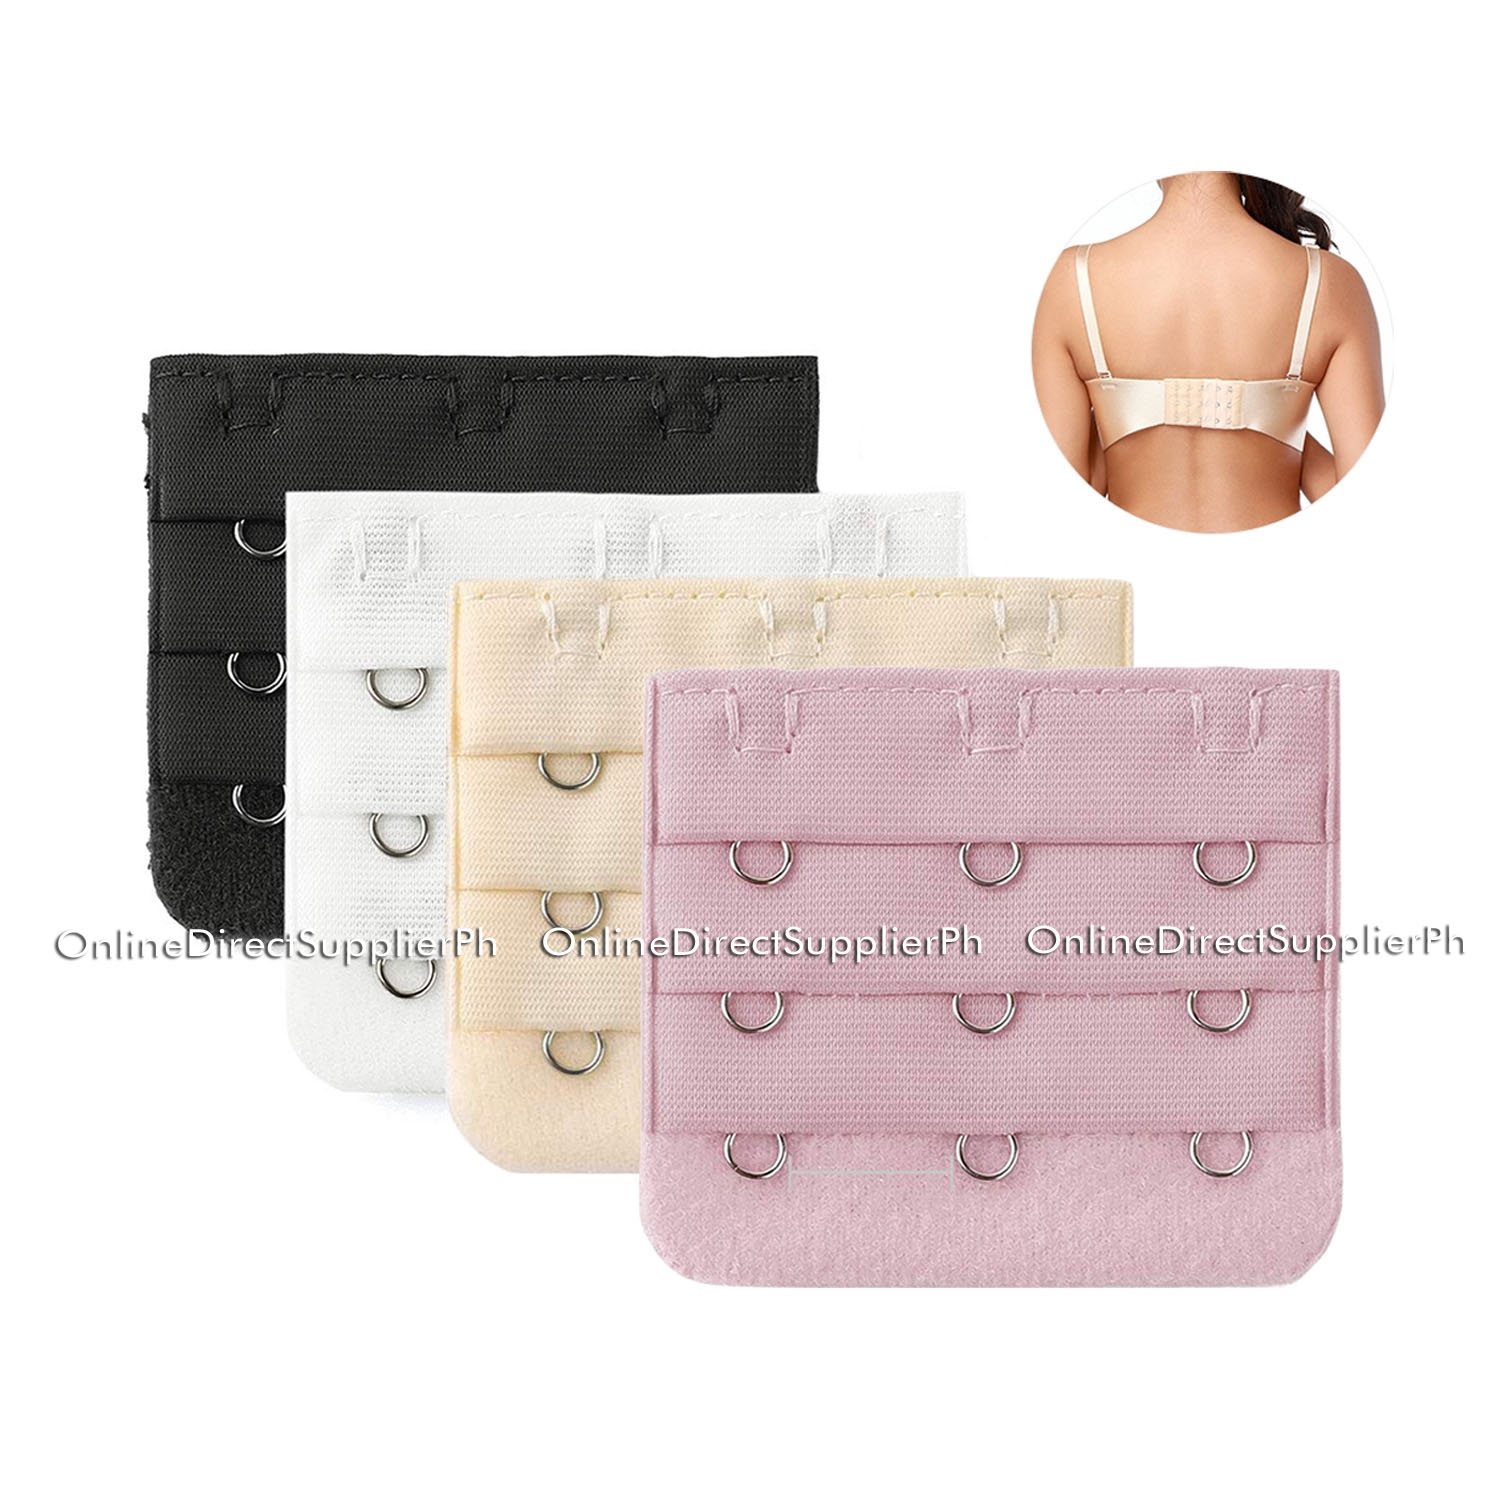 3 Hook Bra Extender Set available at Lucky Doll Lingerie Philippines